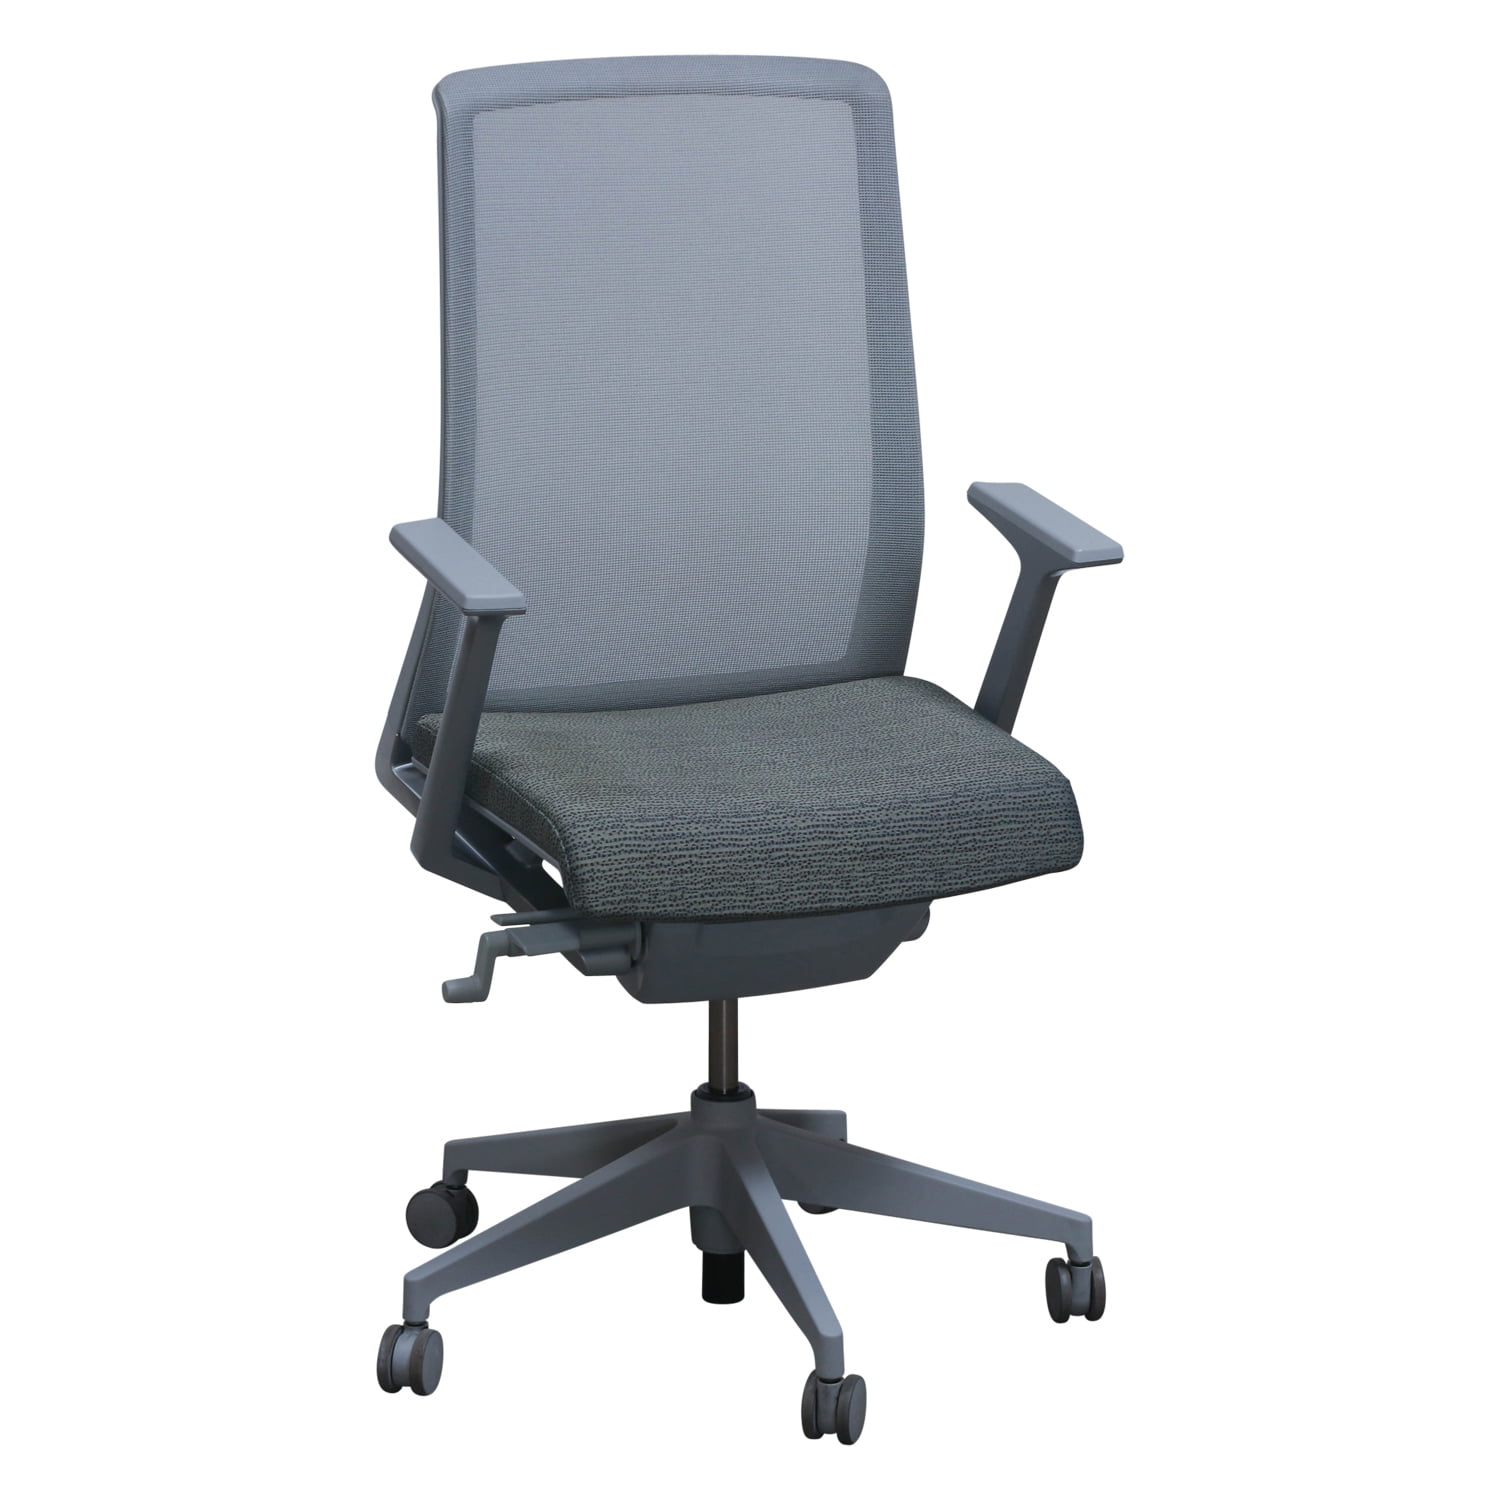 Haworth Very Mesh Conference Chair Used, Tan and Black